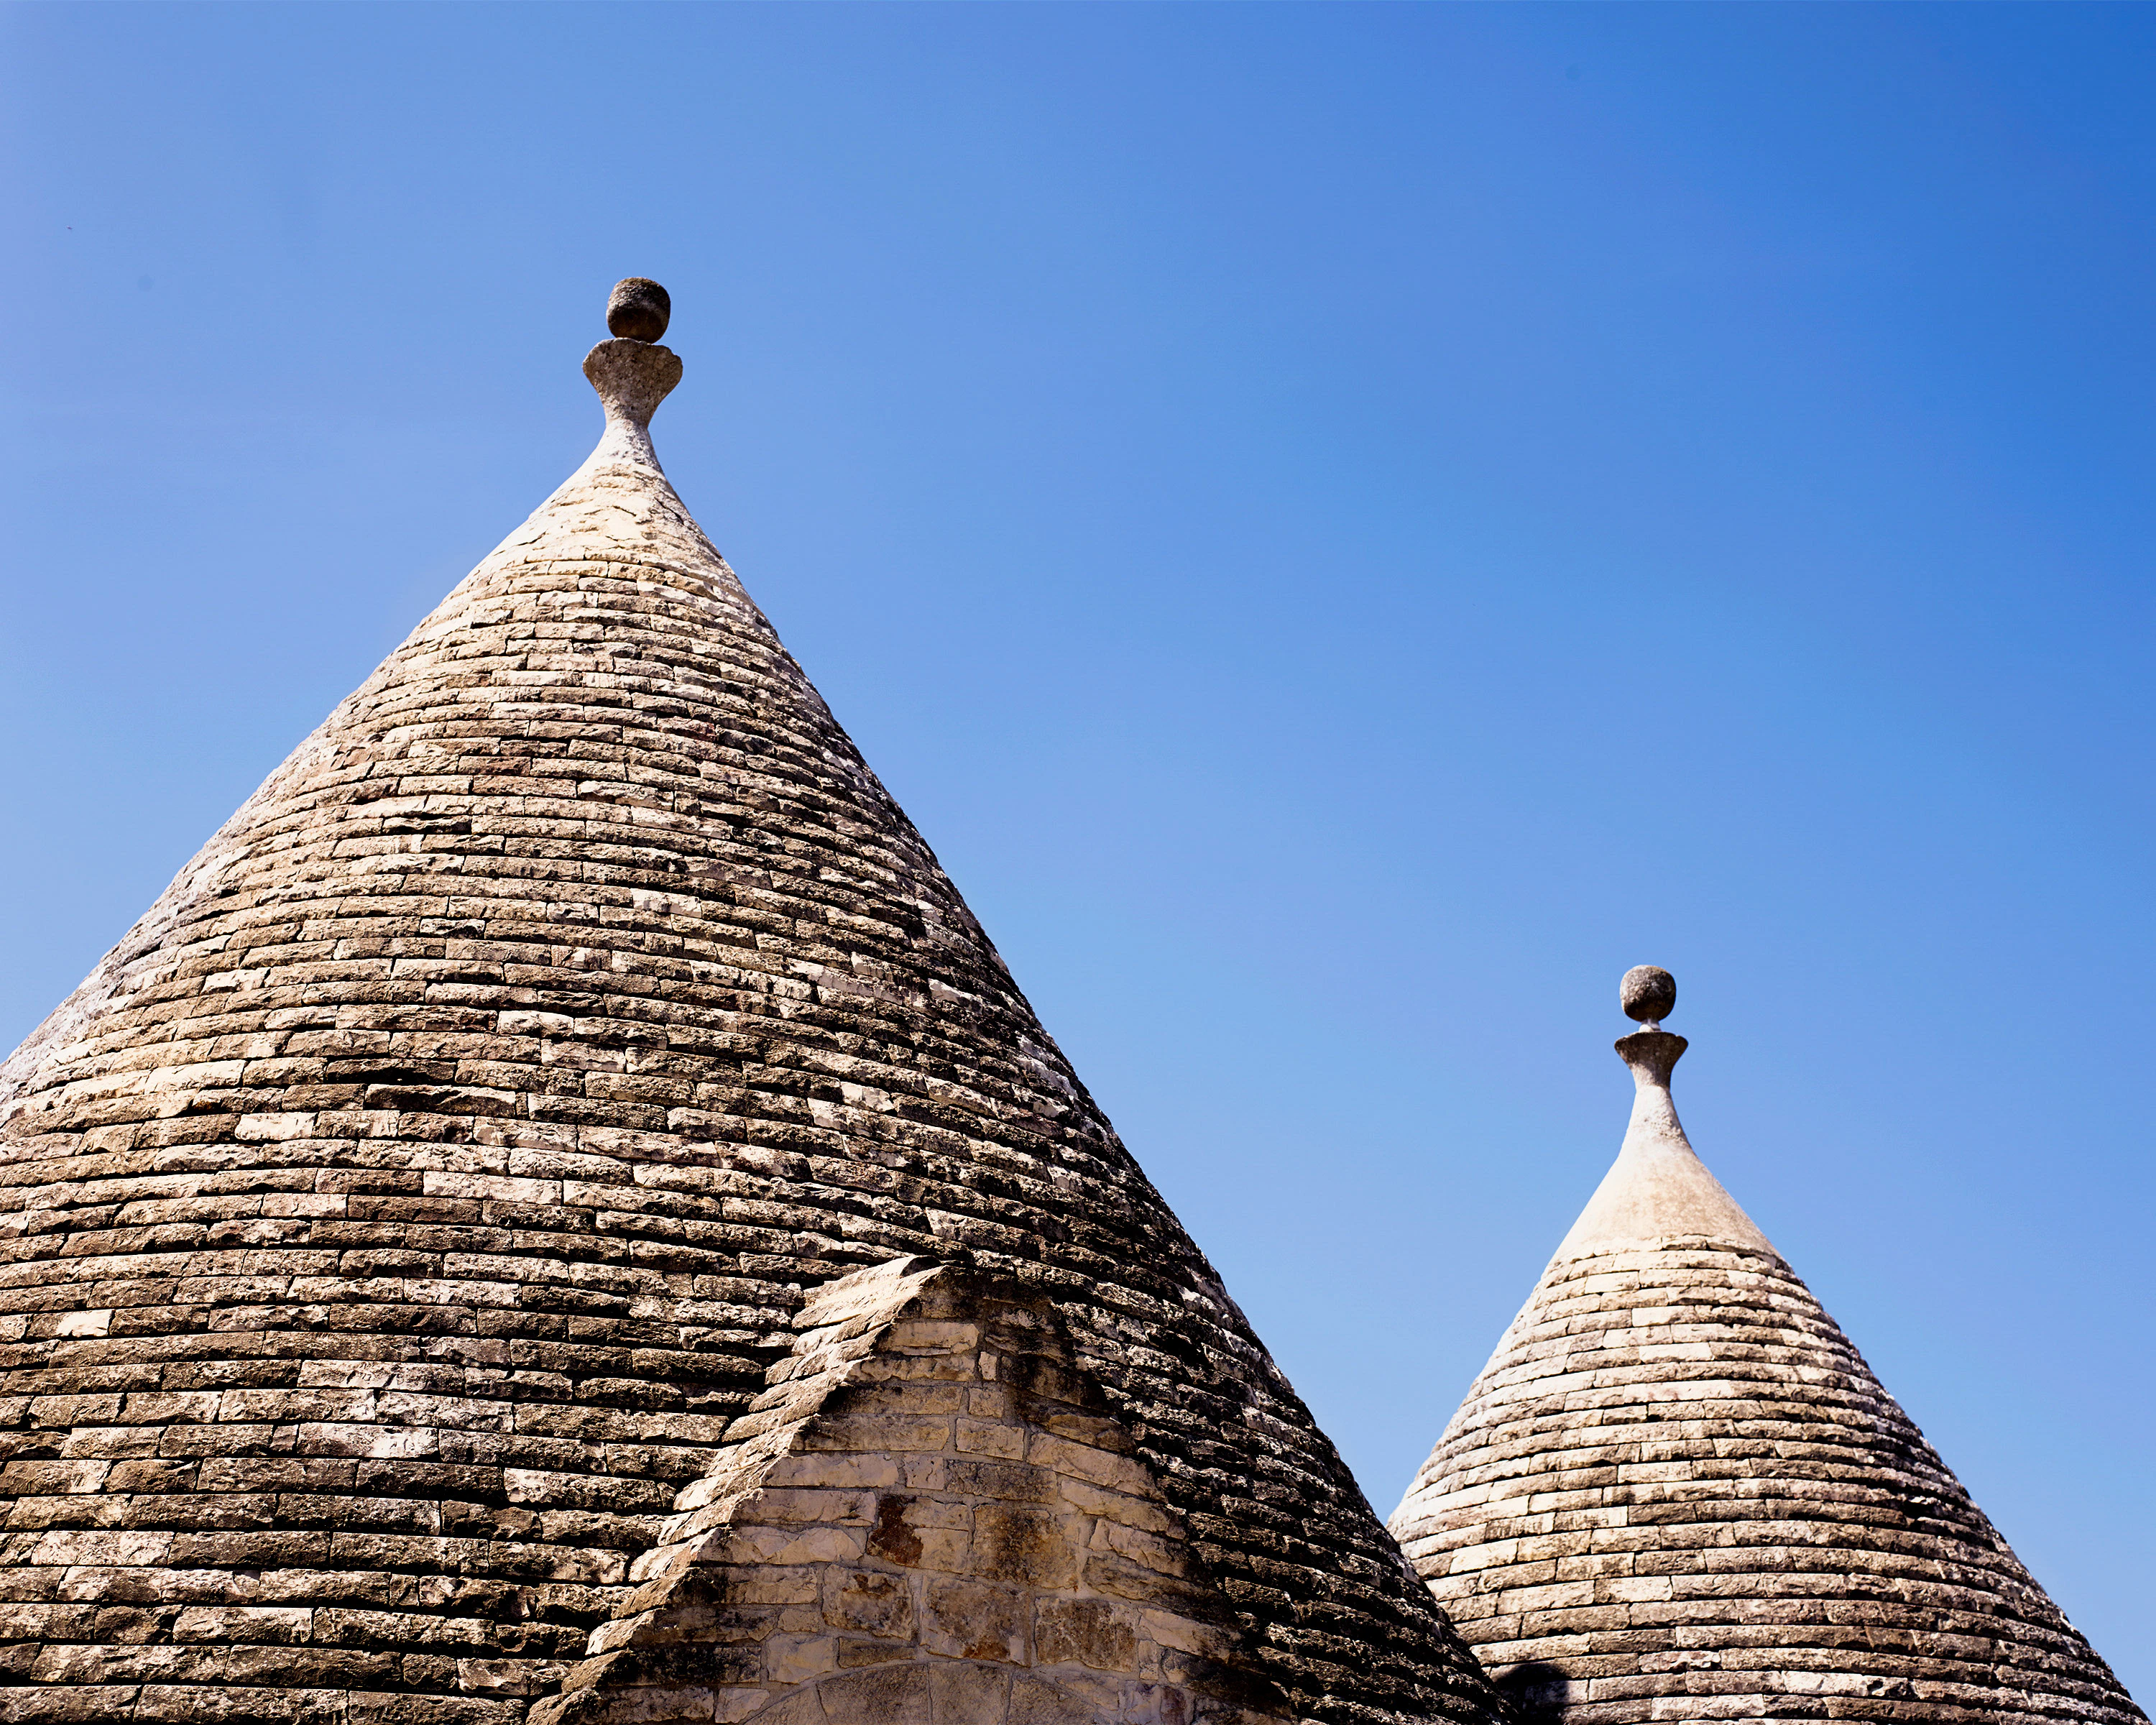 Trullo (traditional Puglian dwellings) )roofs against a blue sky.